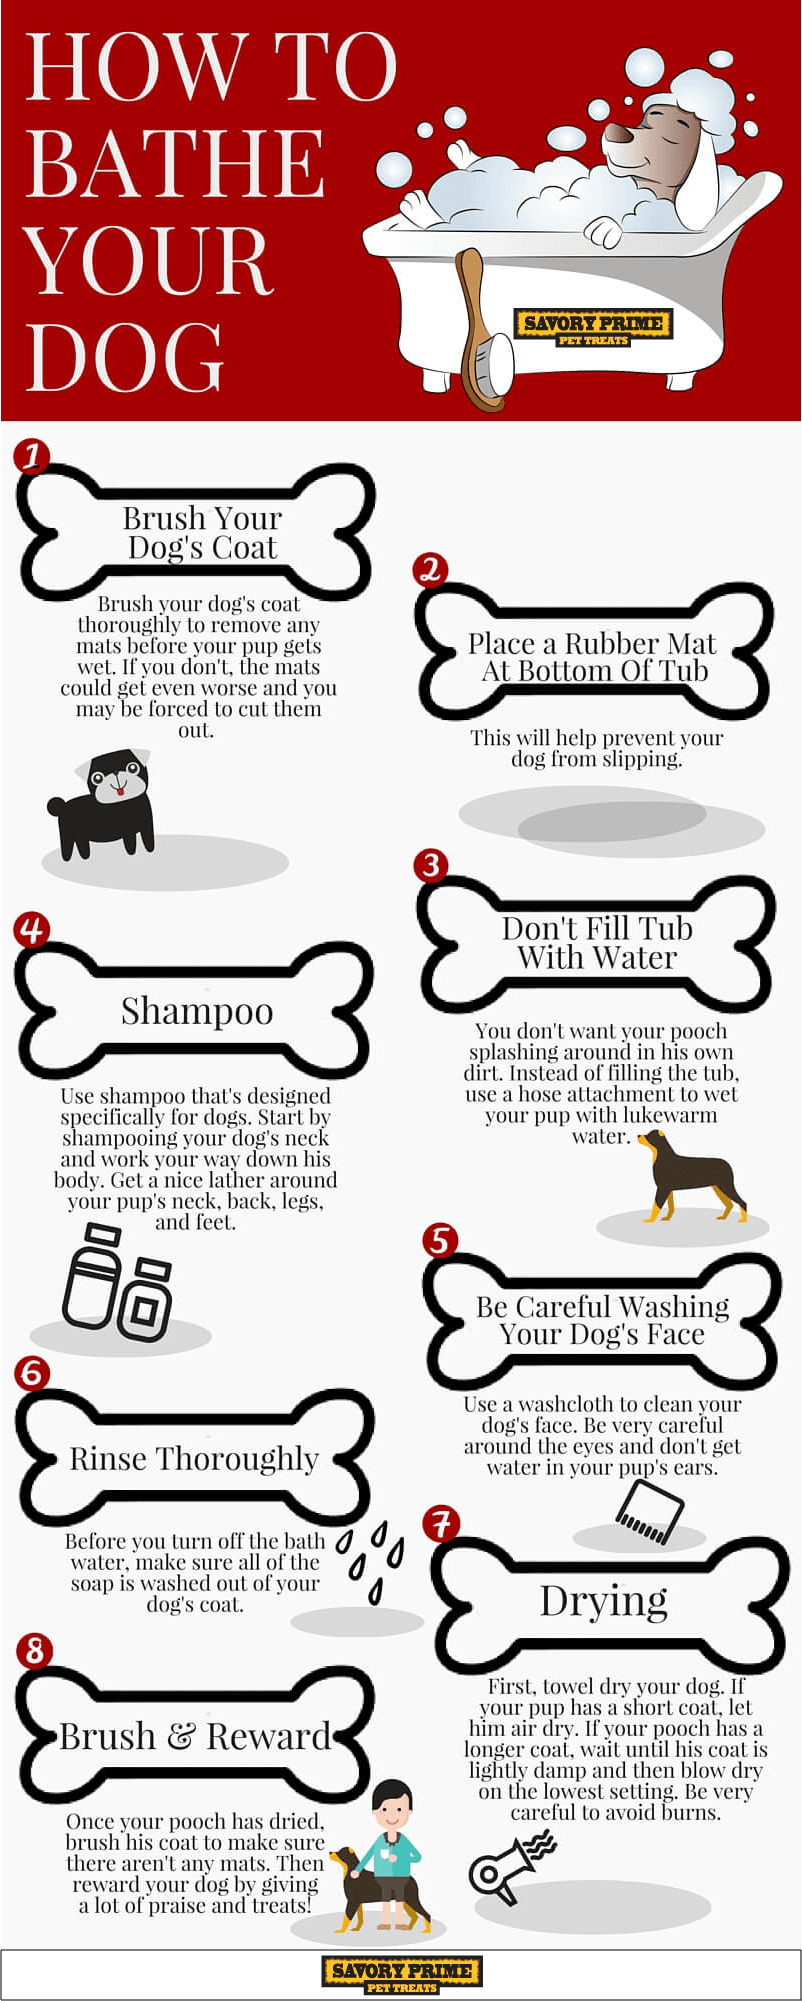 How to properly wash a dog?